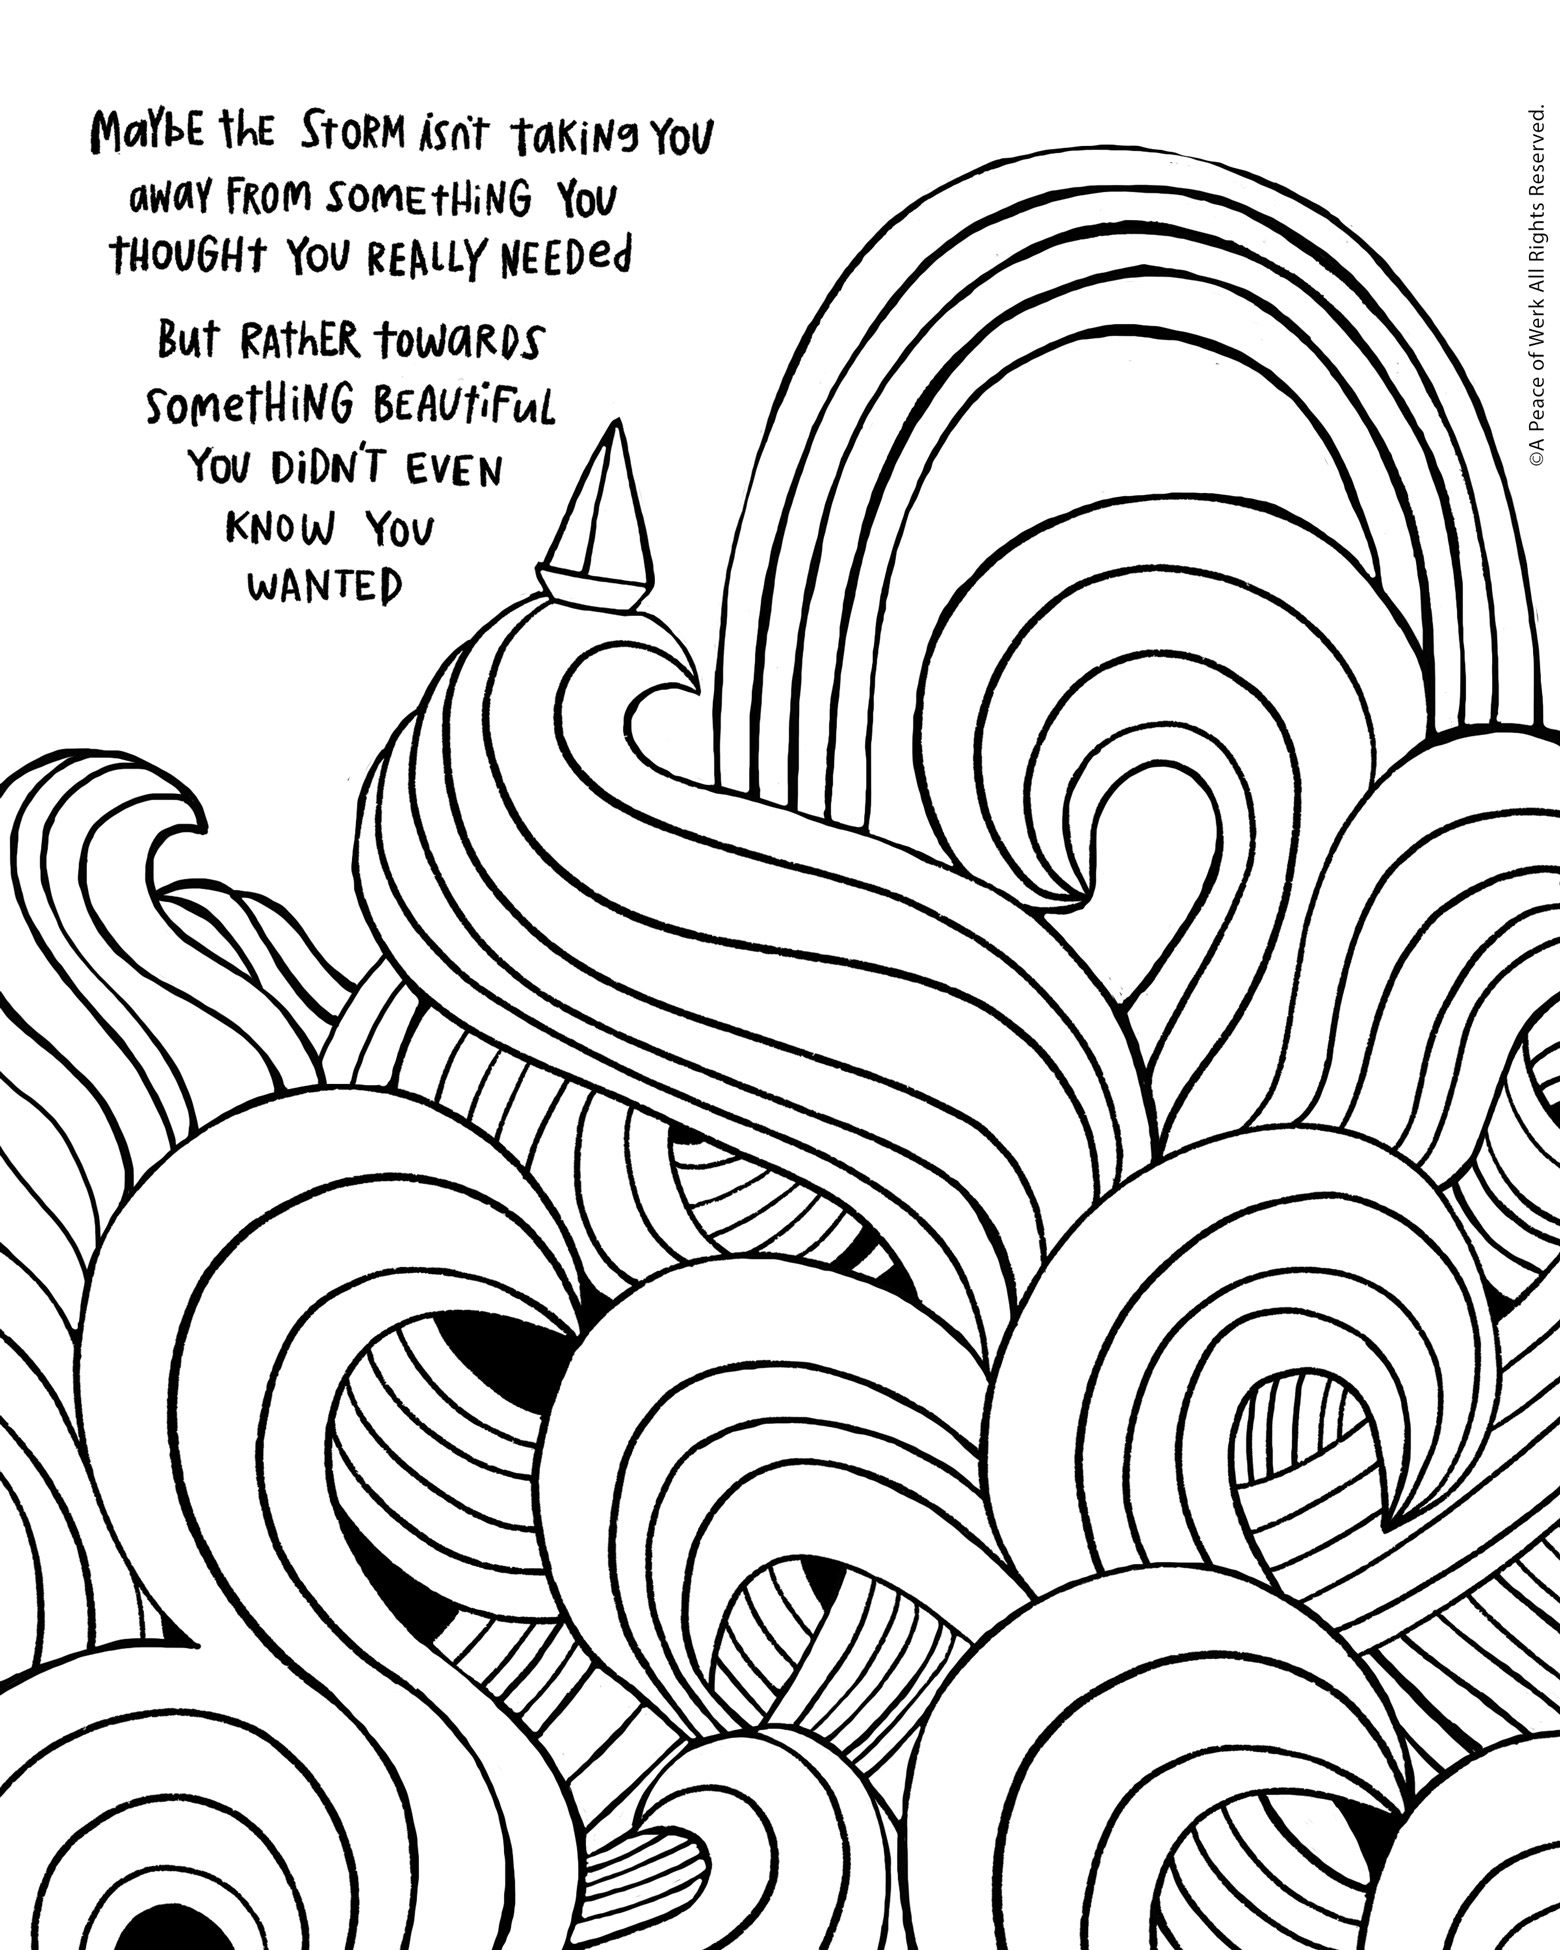 Free coloring page to encourage you during a difficult time